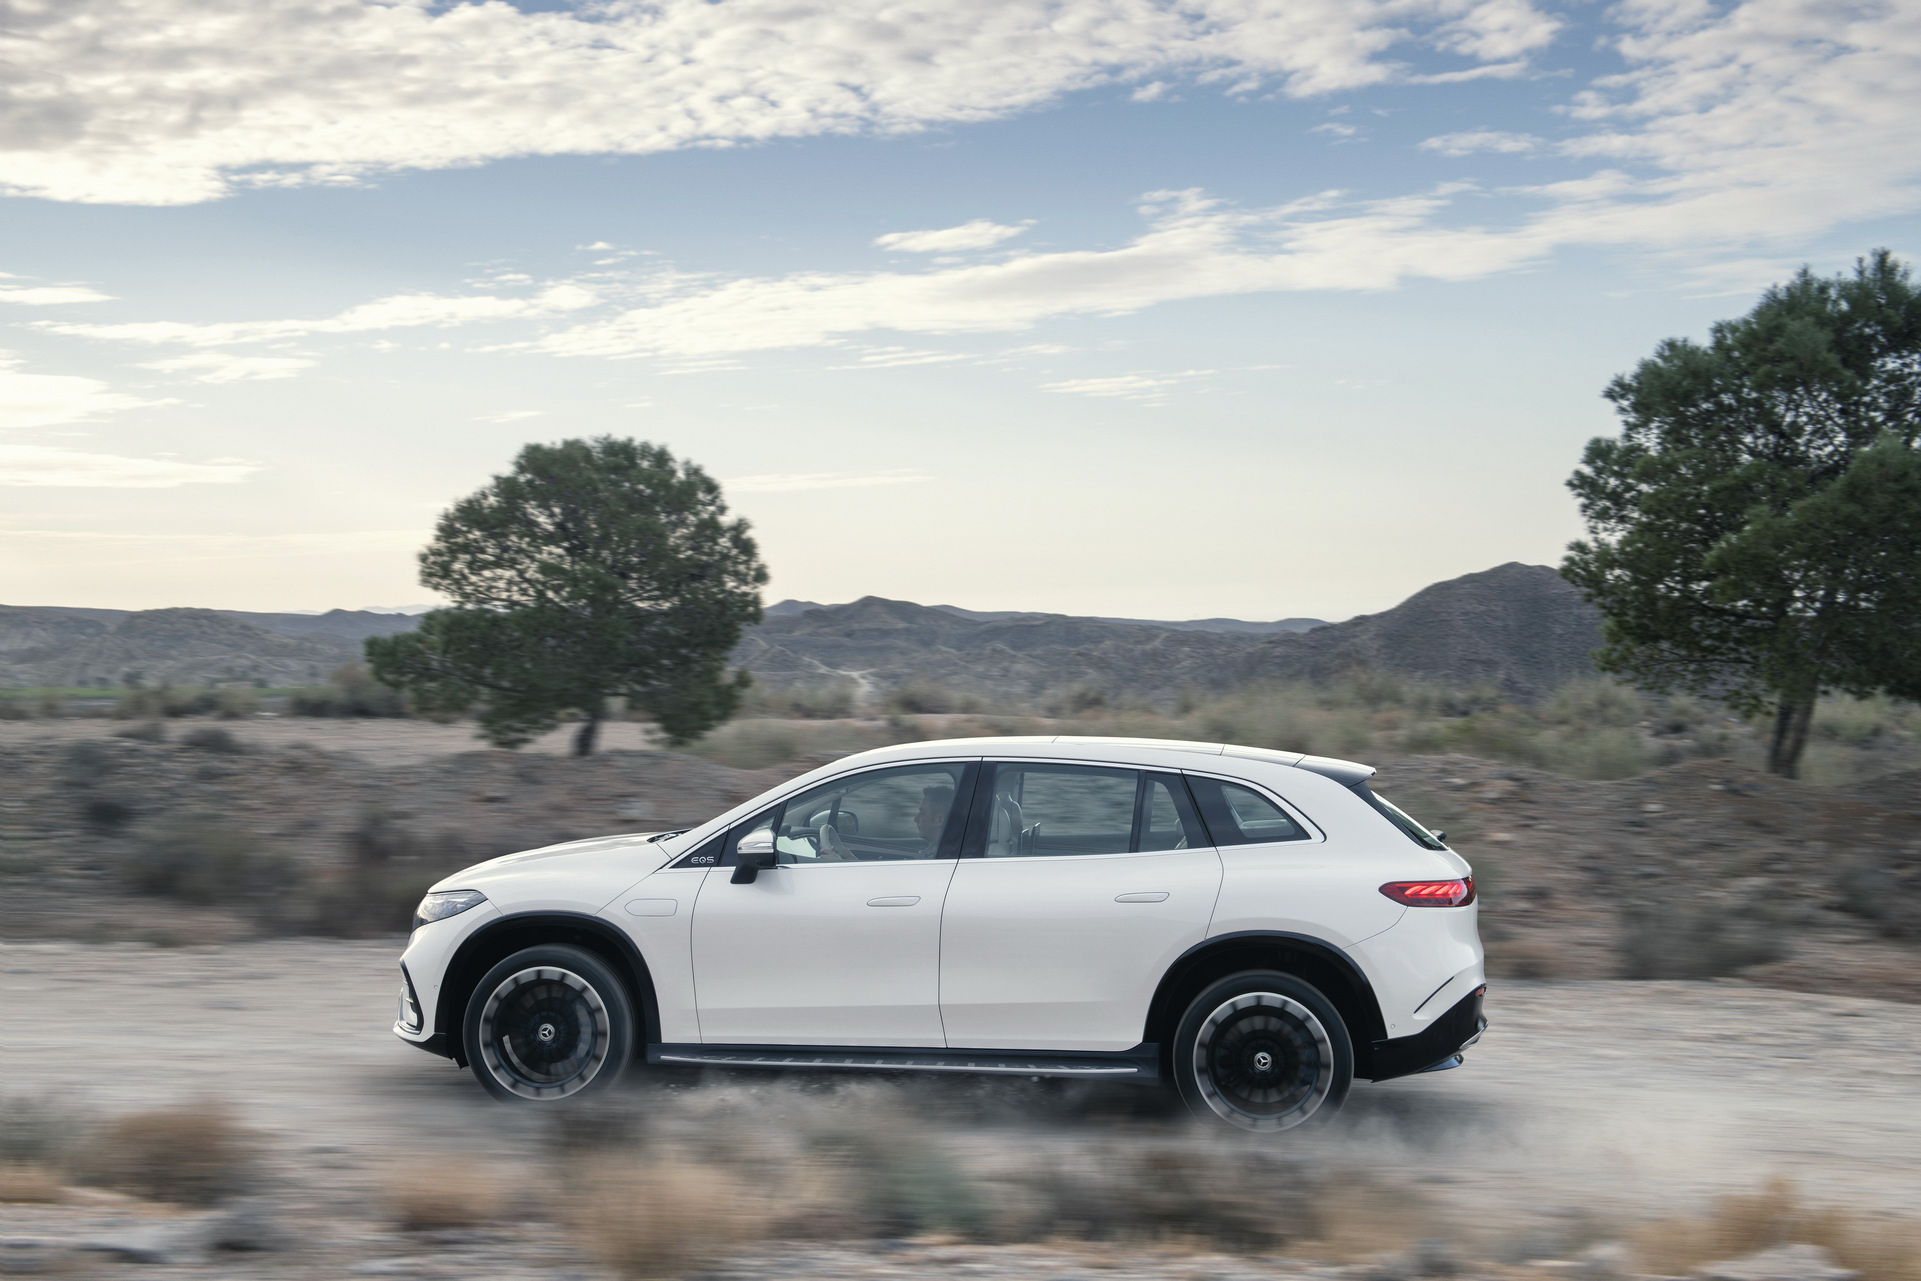 The Mercedes-Benz EQS super product officially has an SUV version - the 'new king' of the electric luxury SUV segment is here - Photo 3.